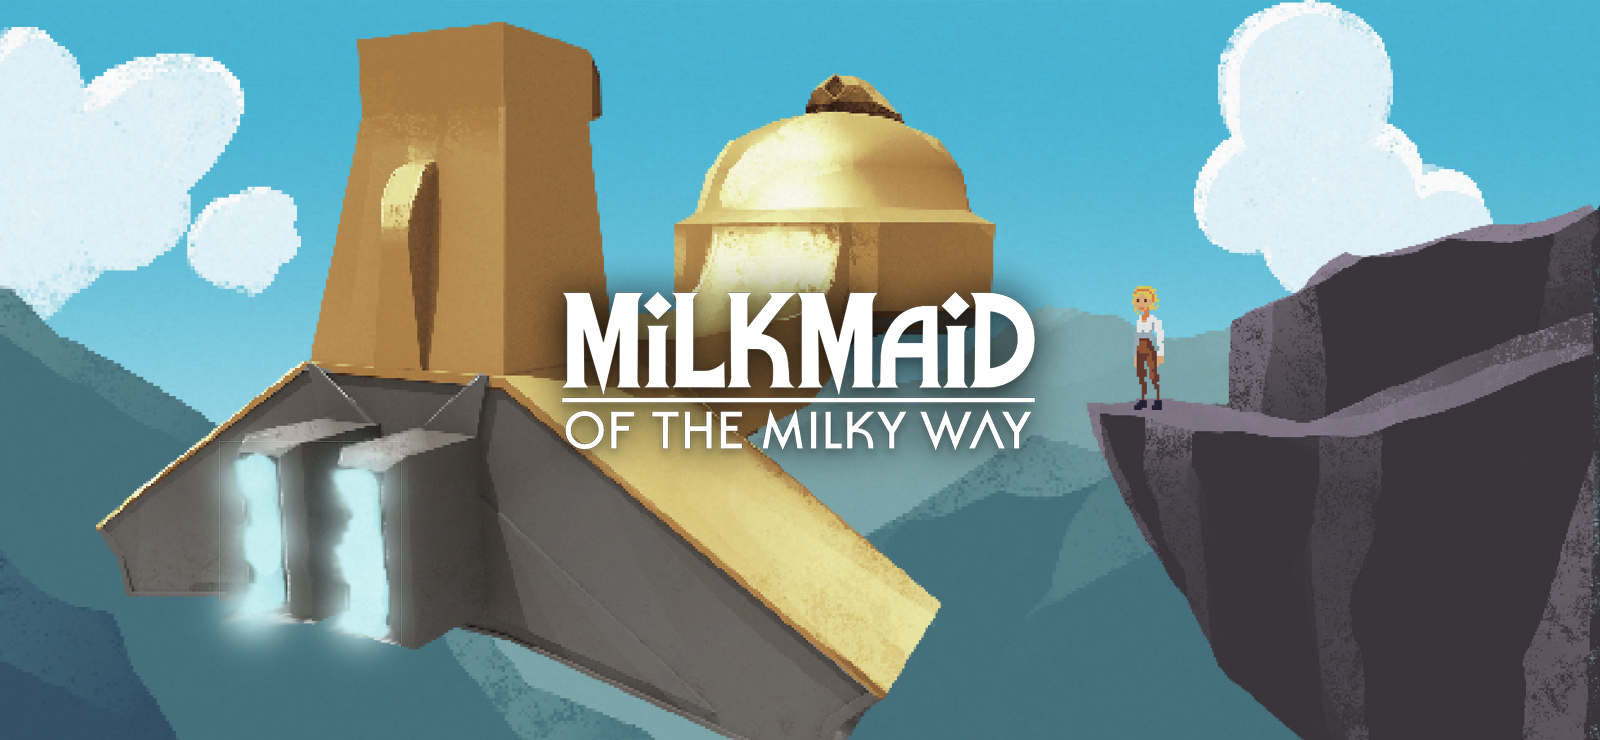 Milkmaid Of The Milky Way